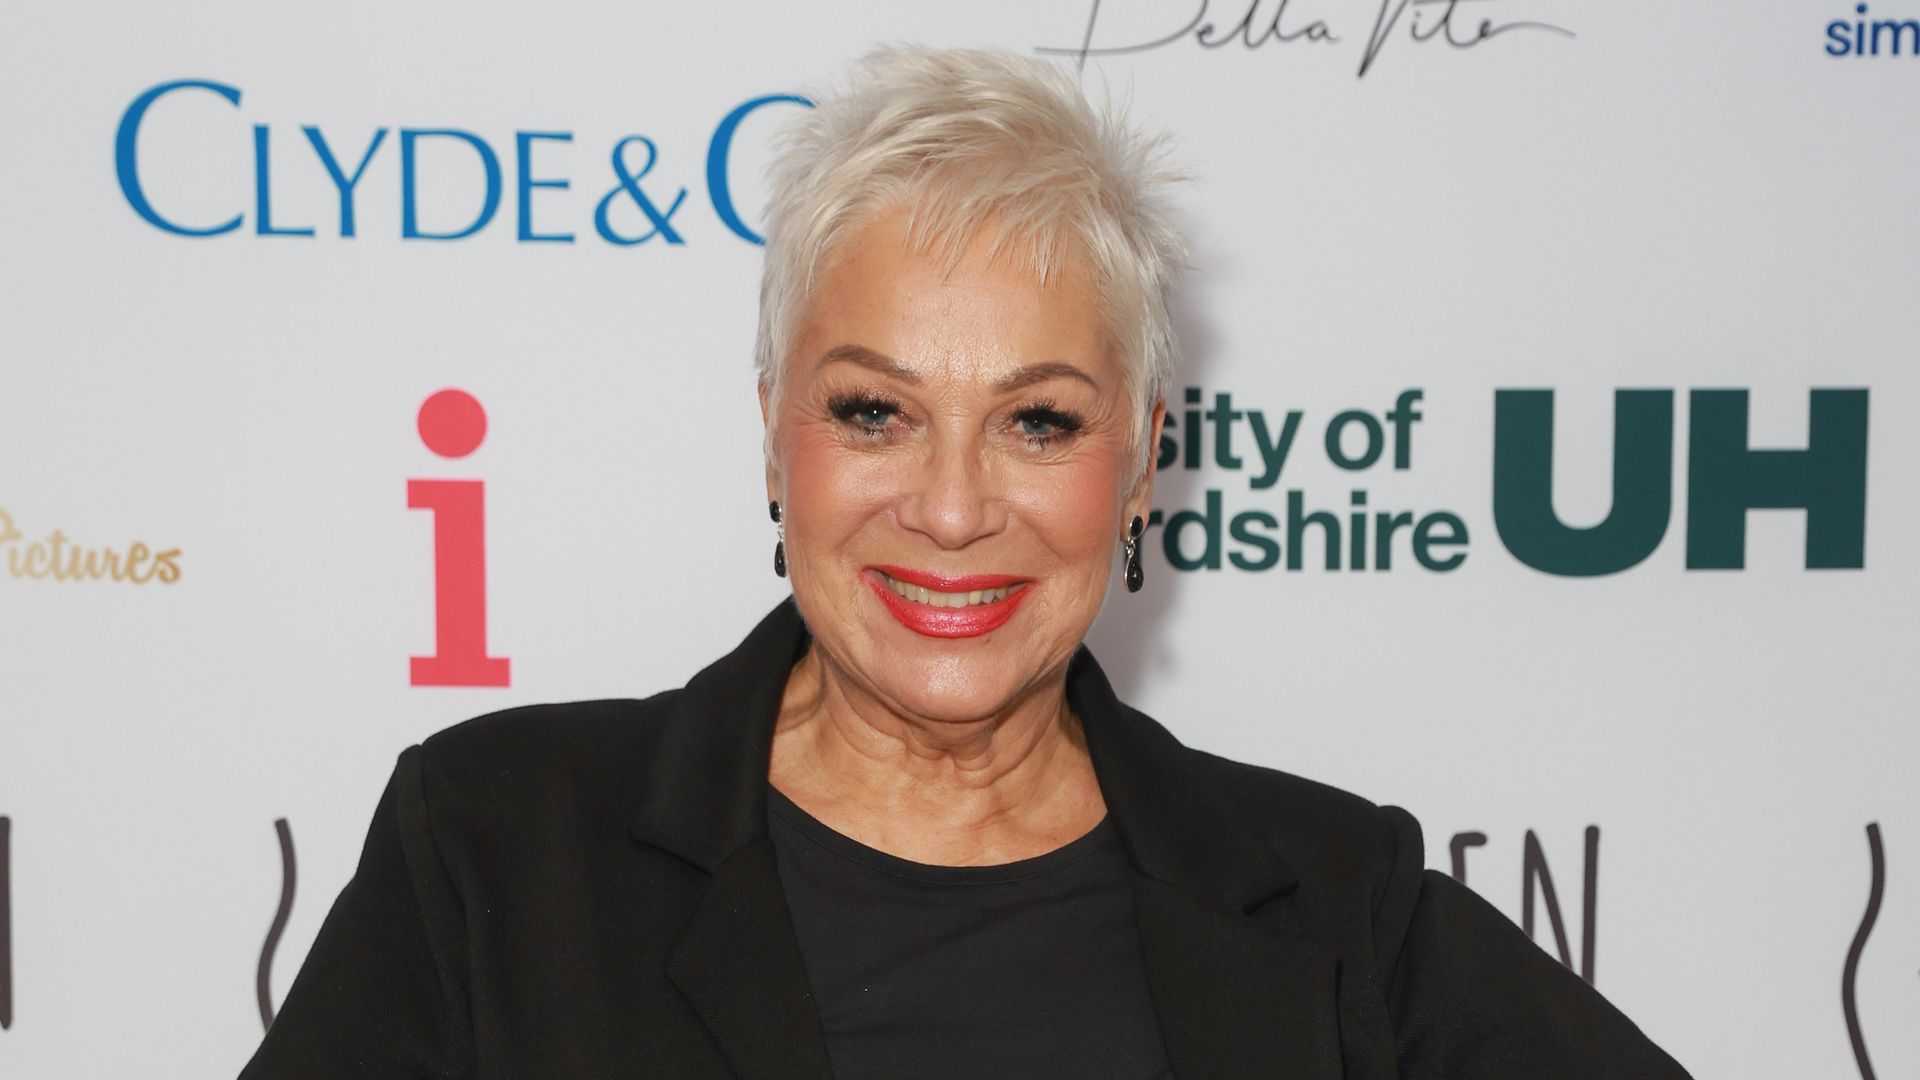 Denise Welch in all-black outfit